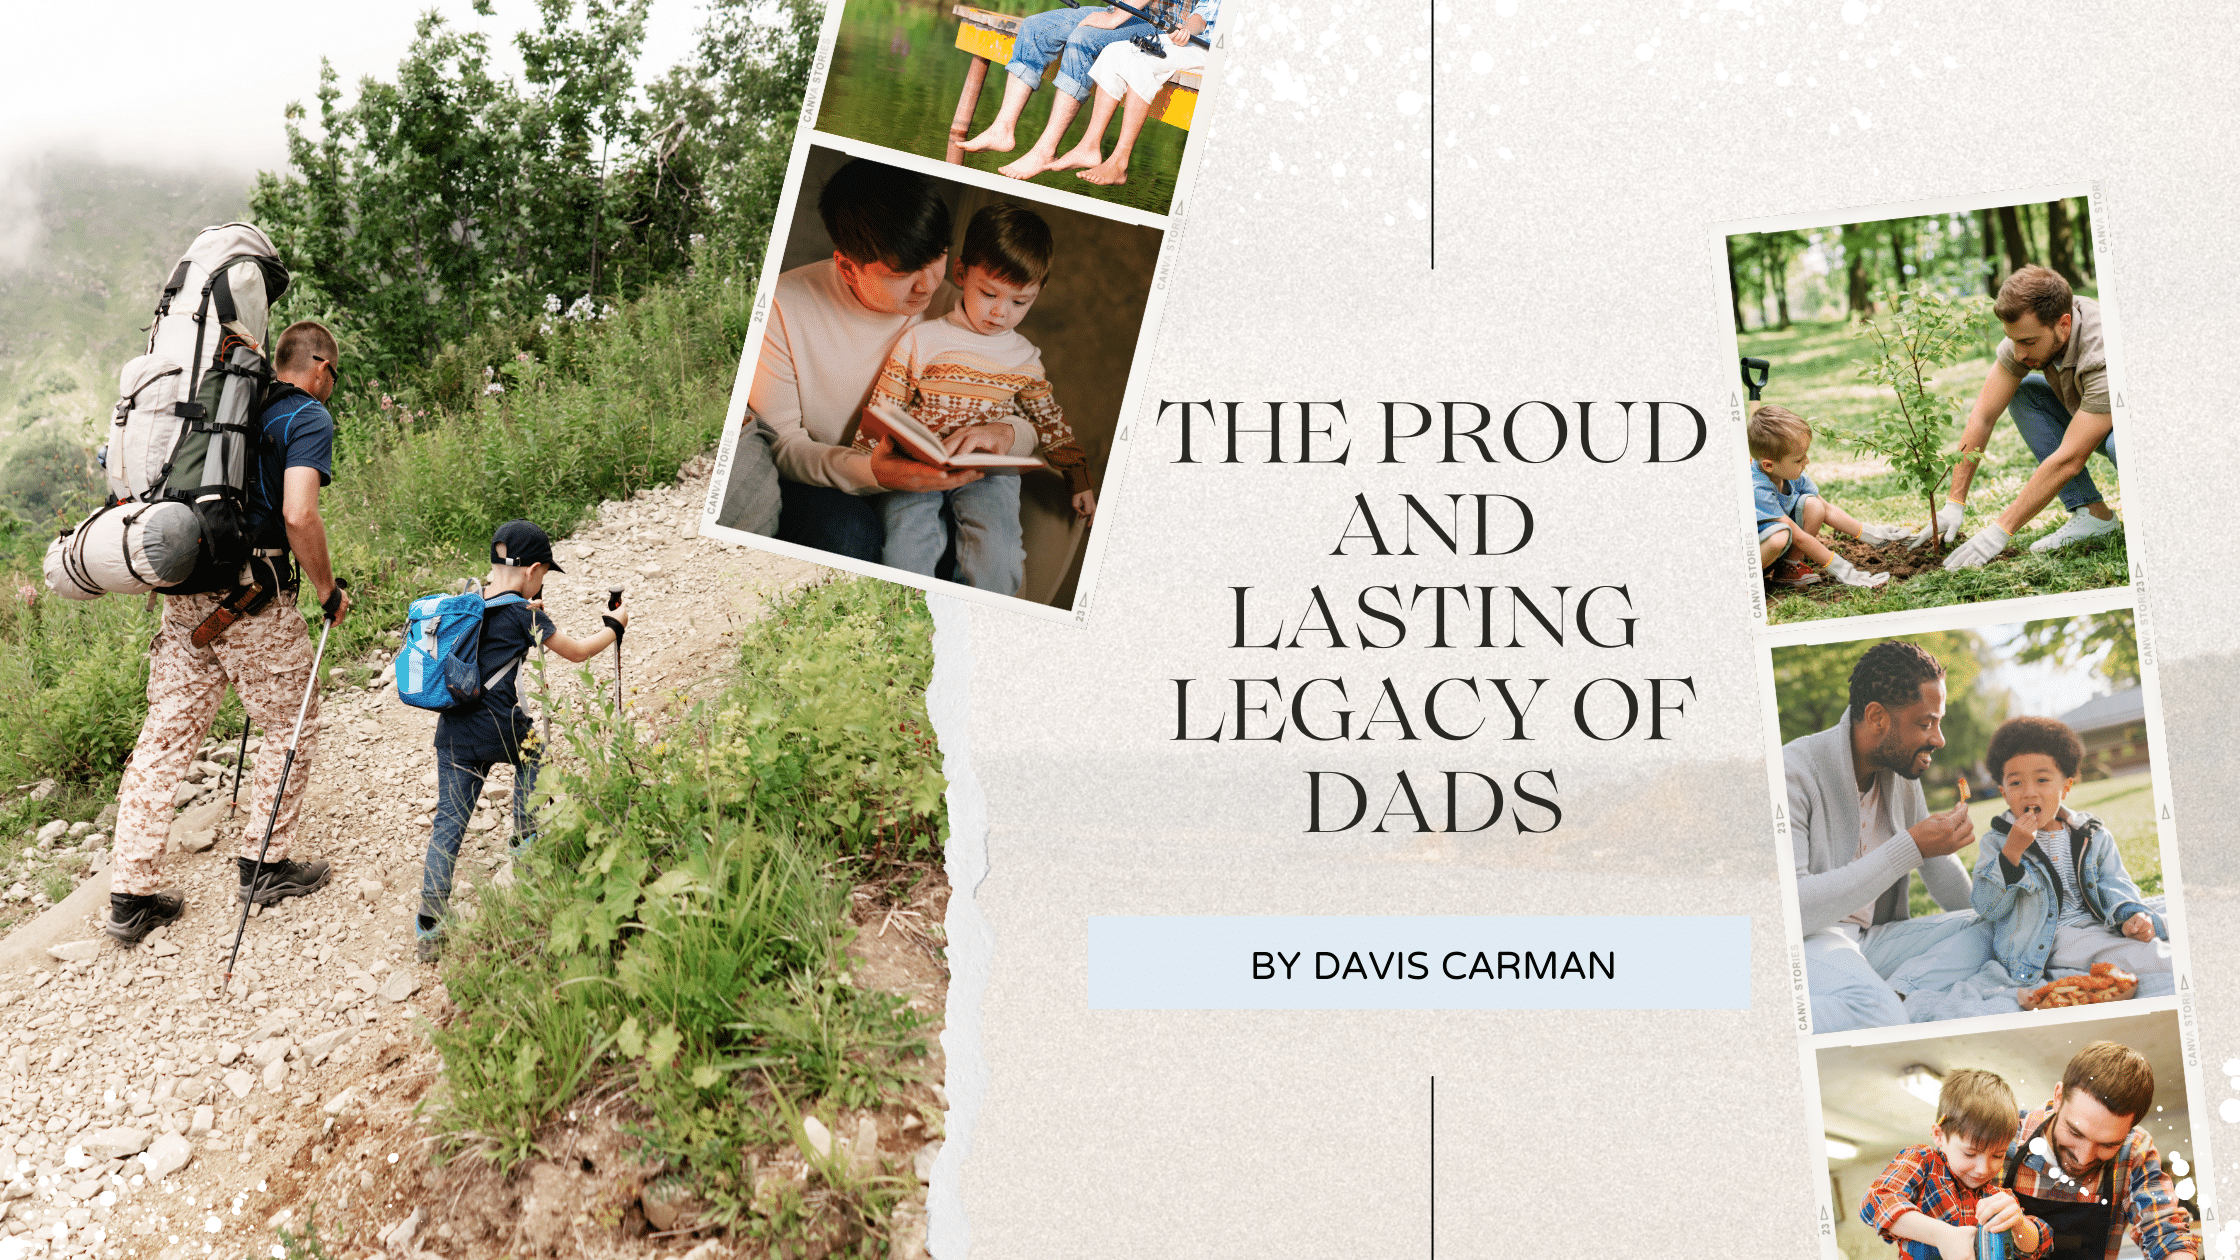 The Proud and Lasting Legacy of Dads